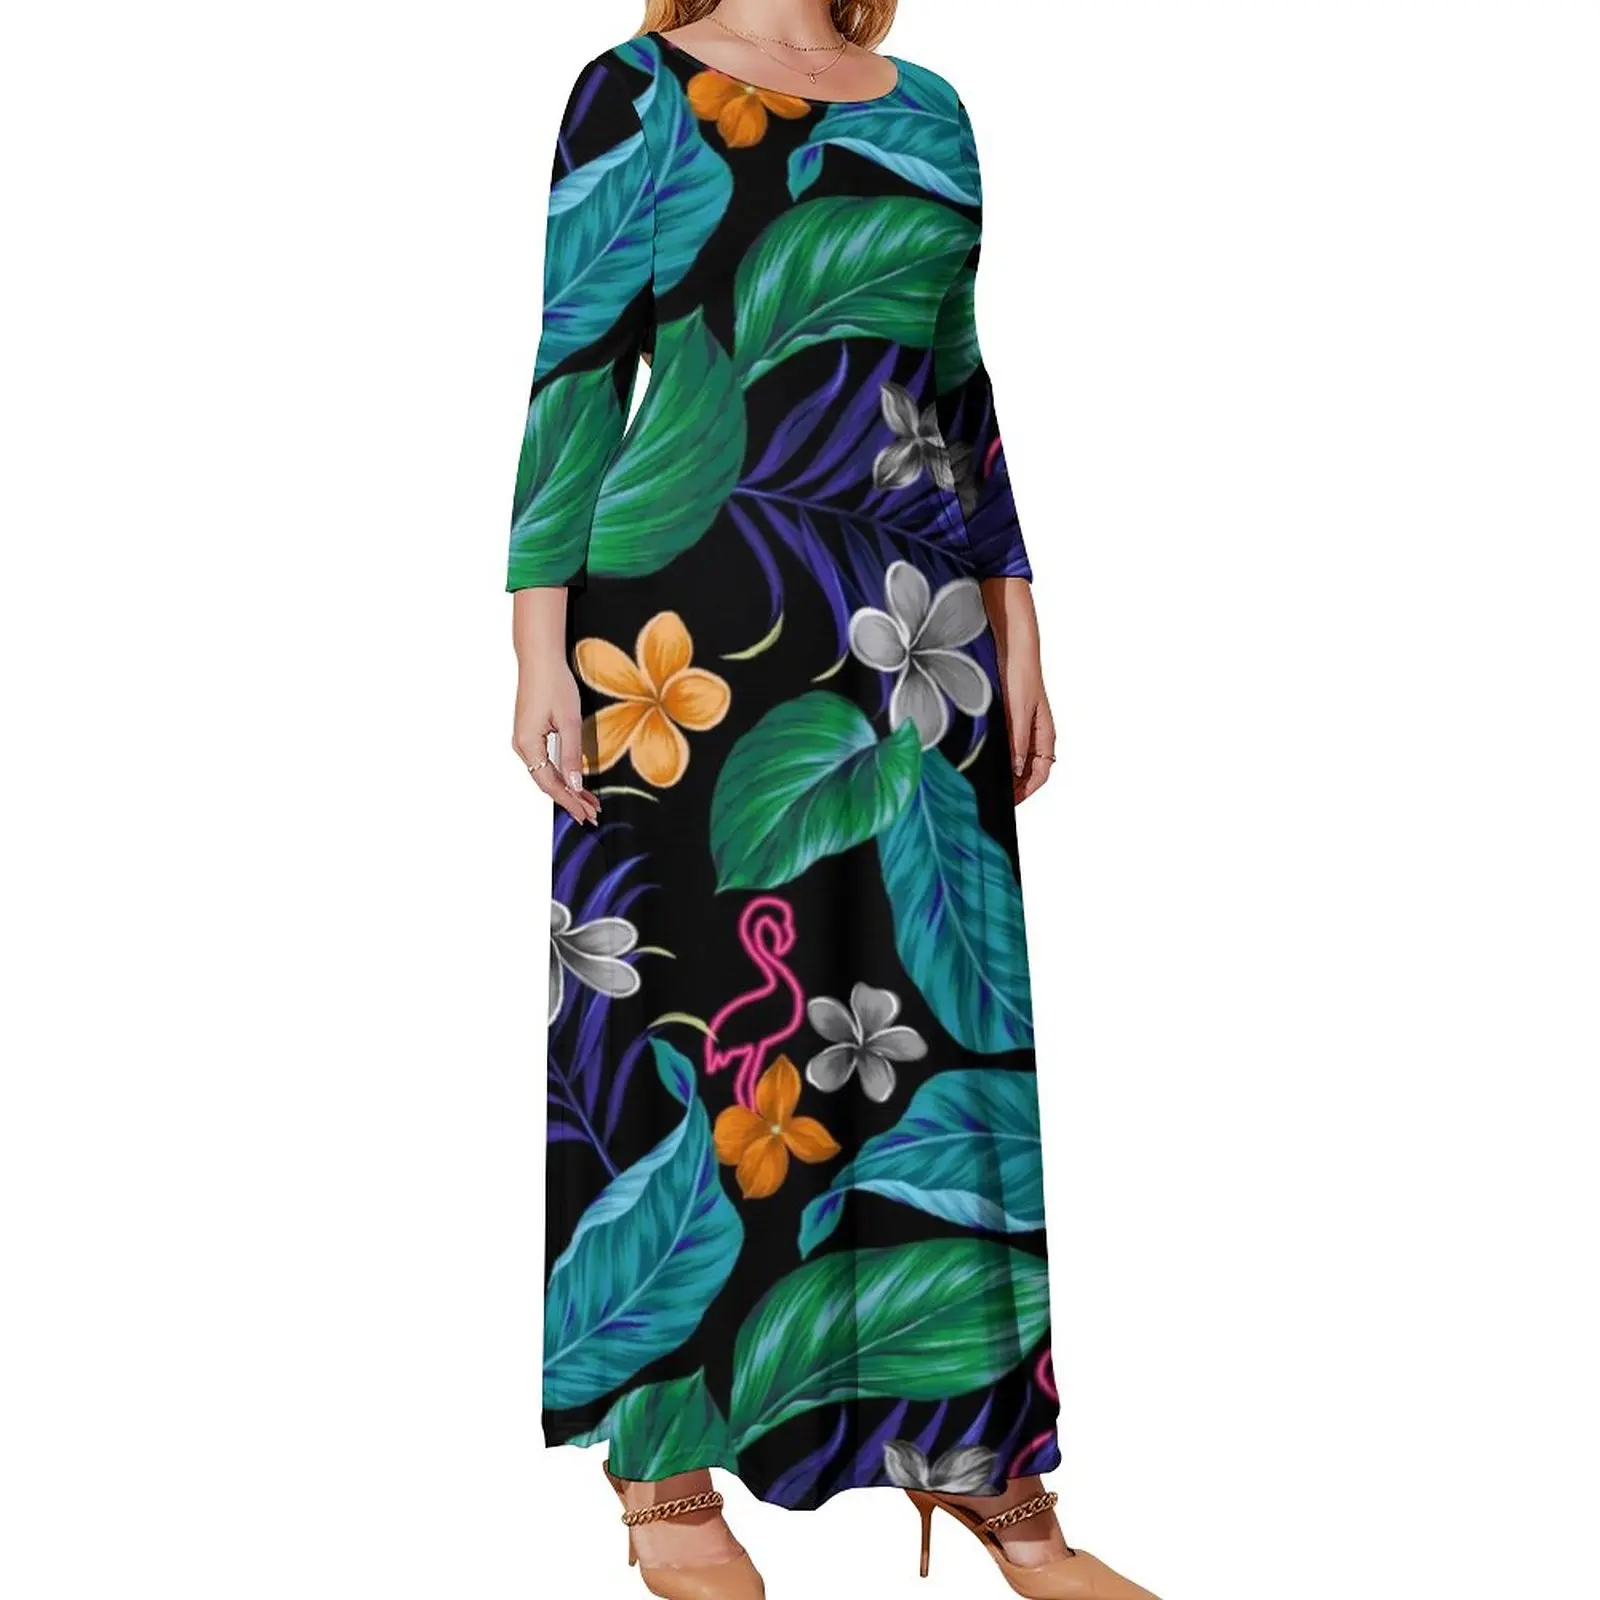 Tropical Floral Dress Long Sleeve Colorful Leaves Print Sexy Maxi Dress Aesthetic Graphic Beach Long Dresses Plus Size 4XL 5XL